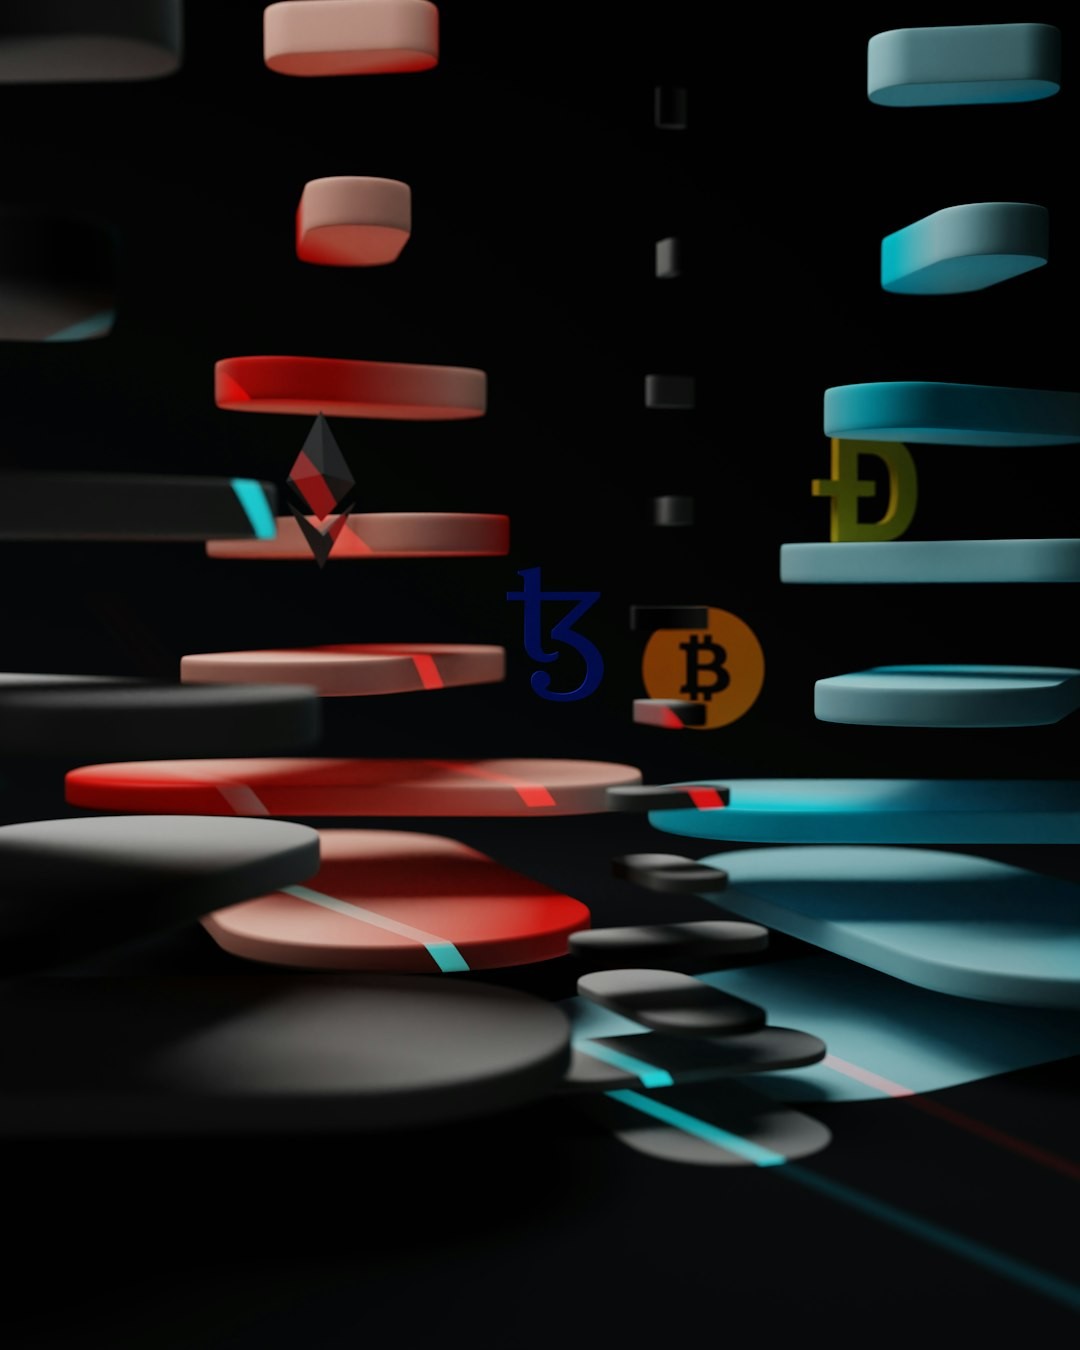 3D illustration of Tezos coin, bitcoin, Ehtereum, and dogecoin floating in the air.
Tezos is a blockchain designed to evolve.
work 👇: 
 Email: shubhamdhage000@gmail.com